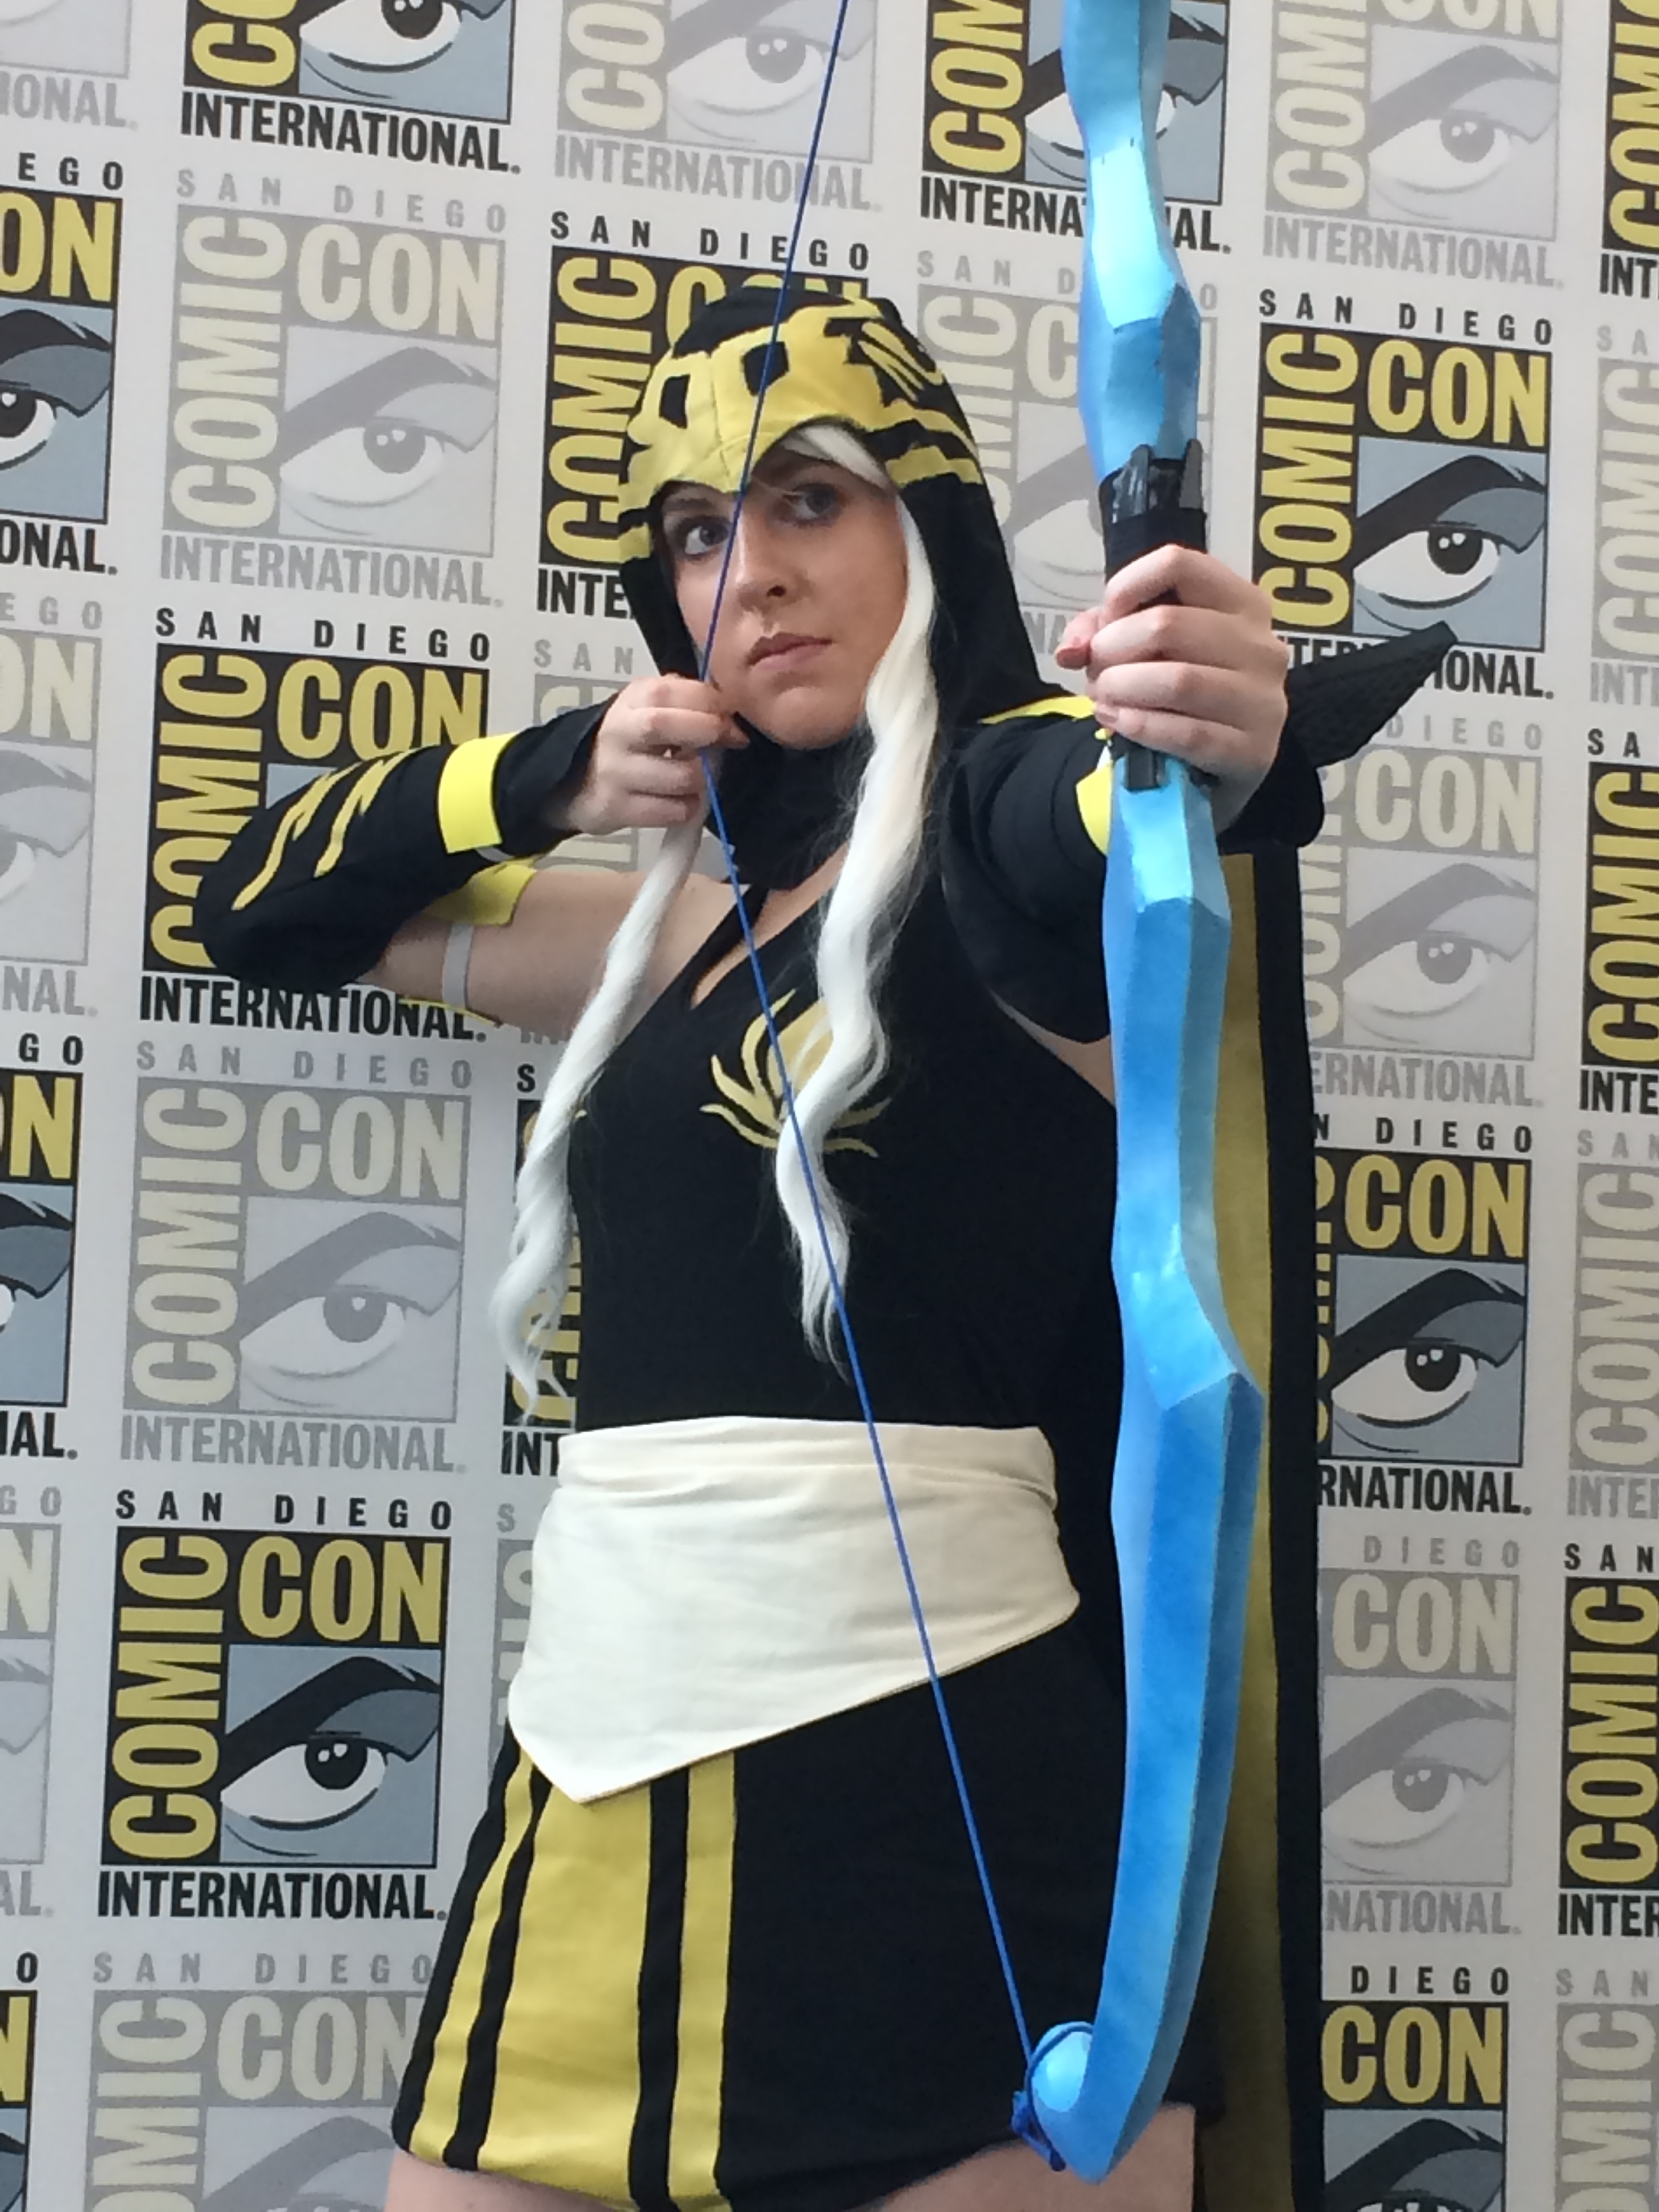 Emma Roberts as Ashe from League of Legends